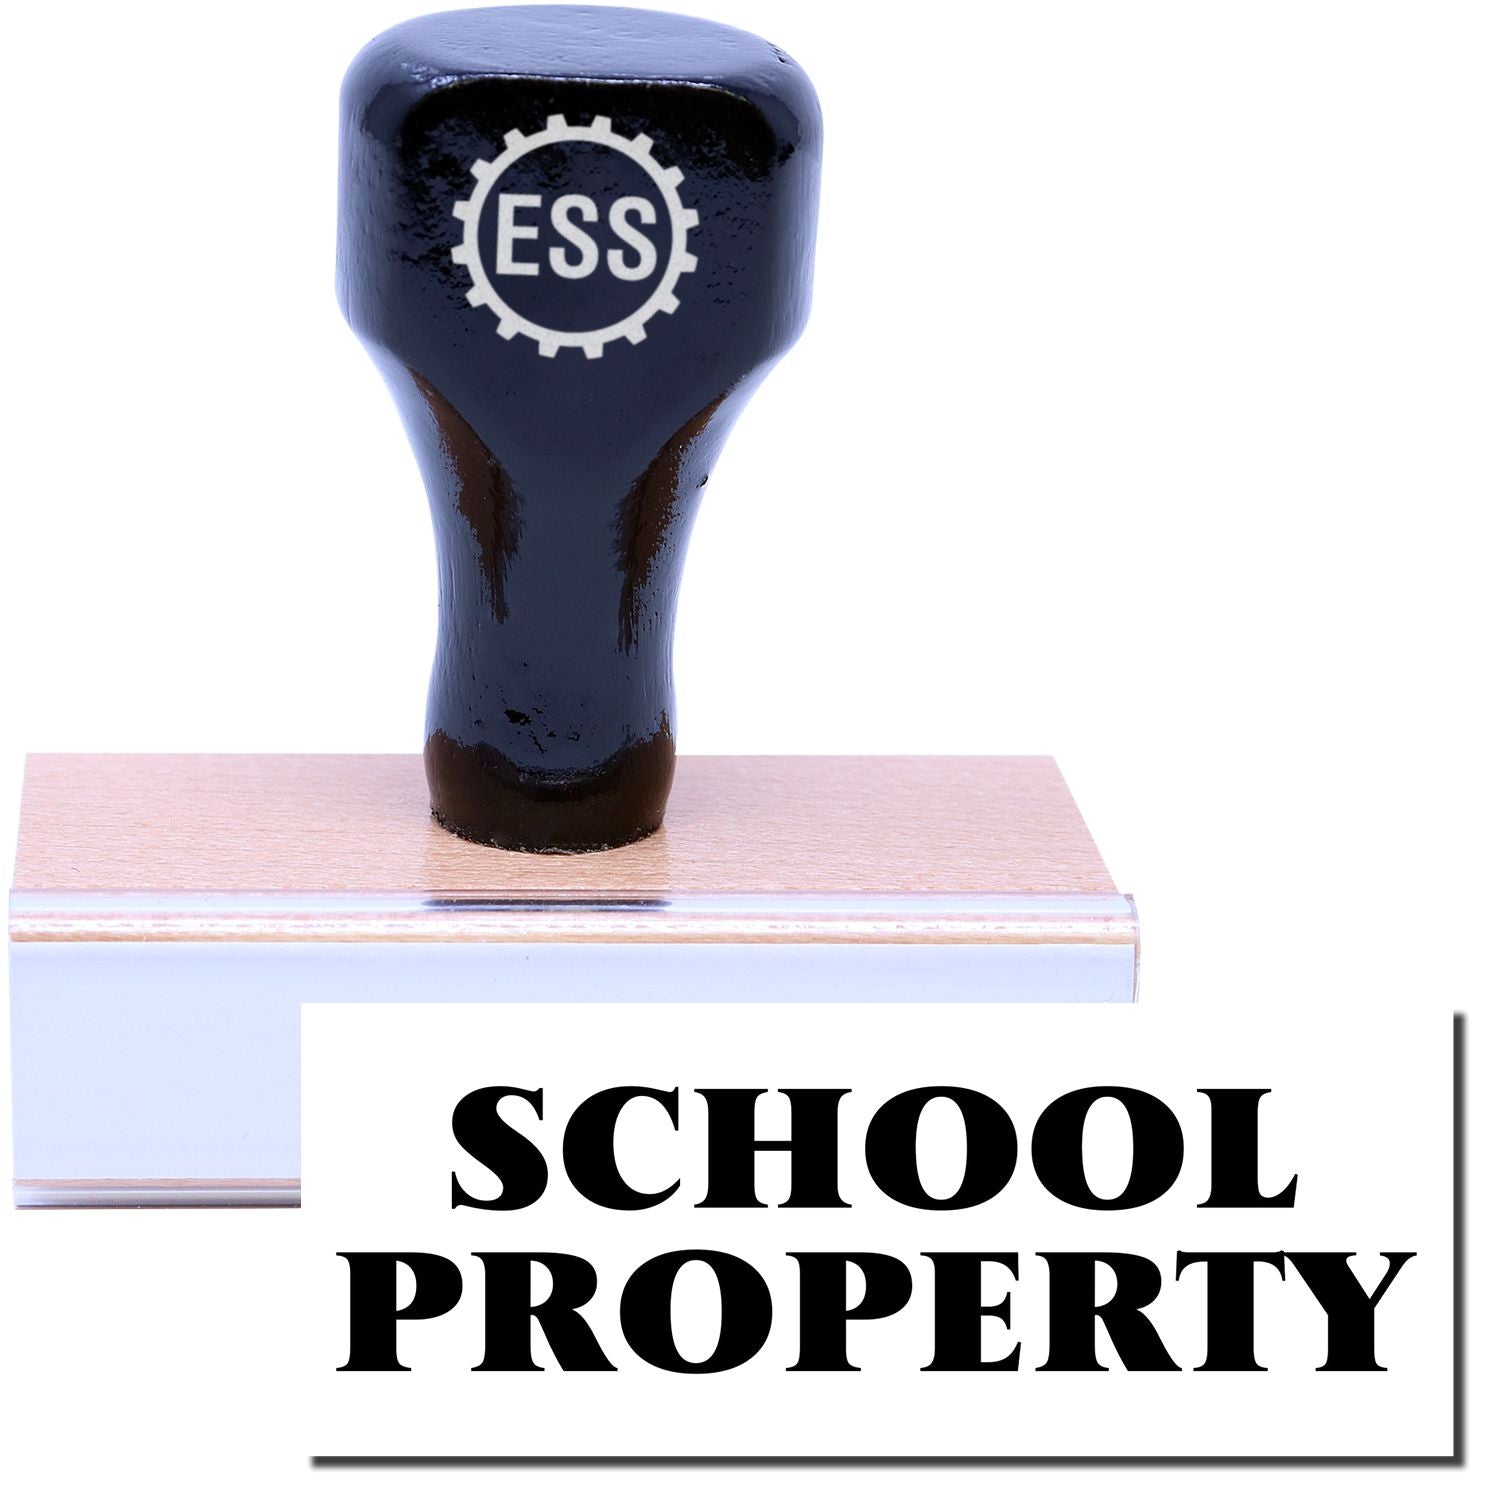 A stock office rubber stamp with a stamped image showing how the text "SCHOOL PROPERTY" in a large font is displayed after stamping.